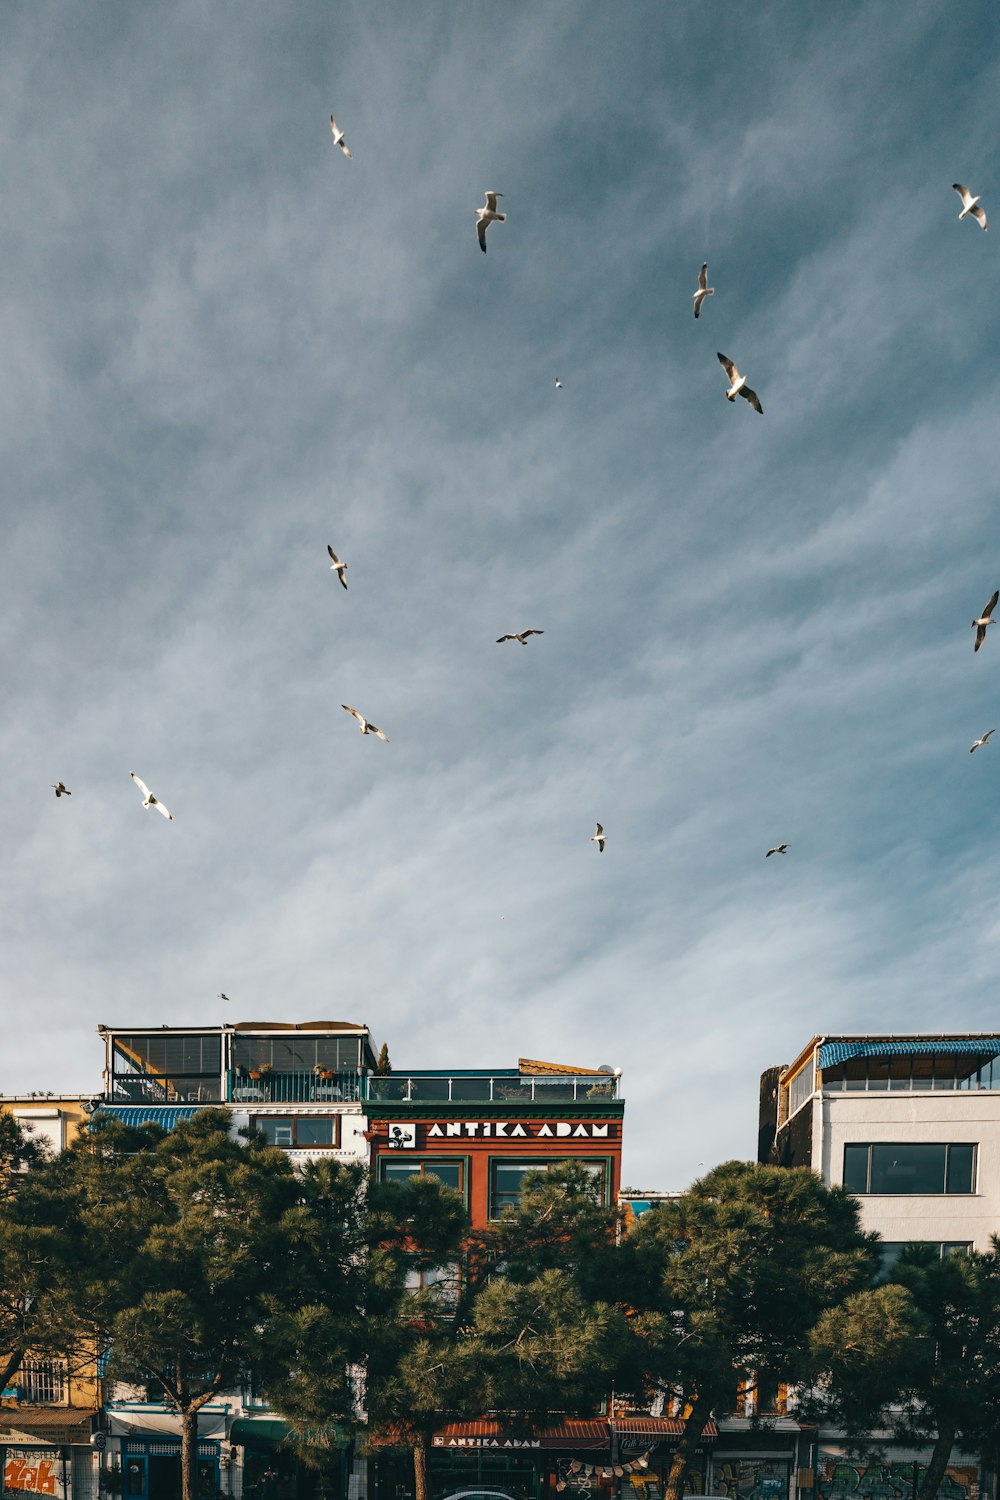 flock of birds flying over the city during daytime